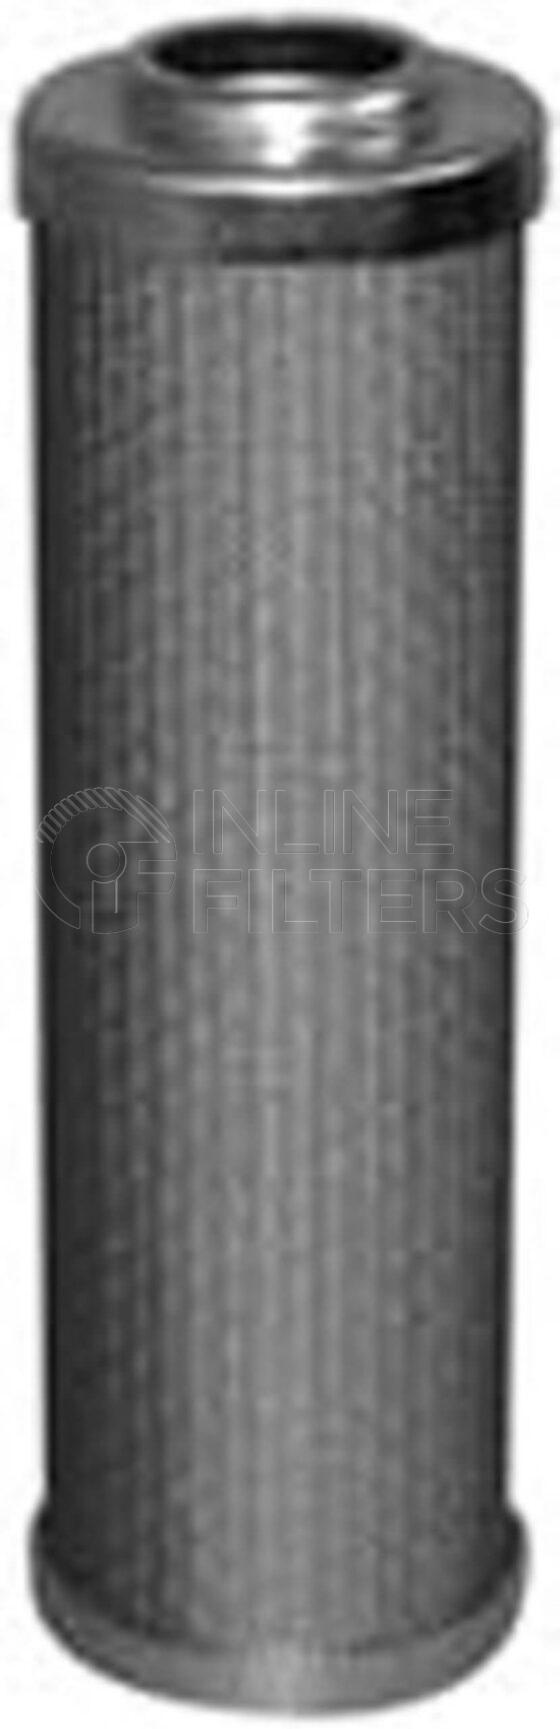 Inline FH50878. Hydraulic Filter Product – Cartridge – O- Ring Product Cartridge hydraulic filter Micron 20 micron 10 Micron version FIN-FH50595